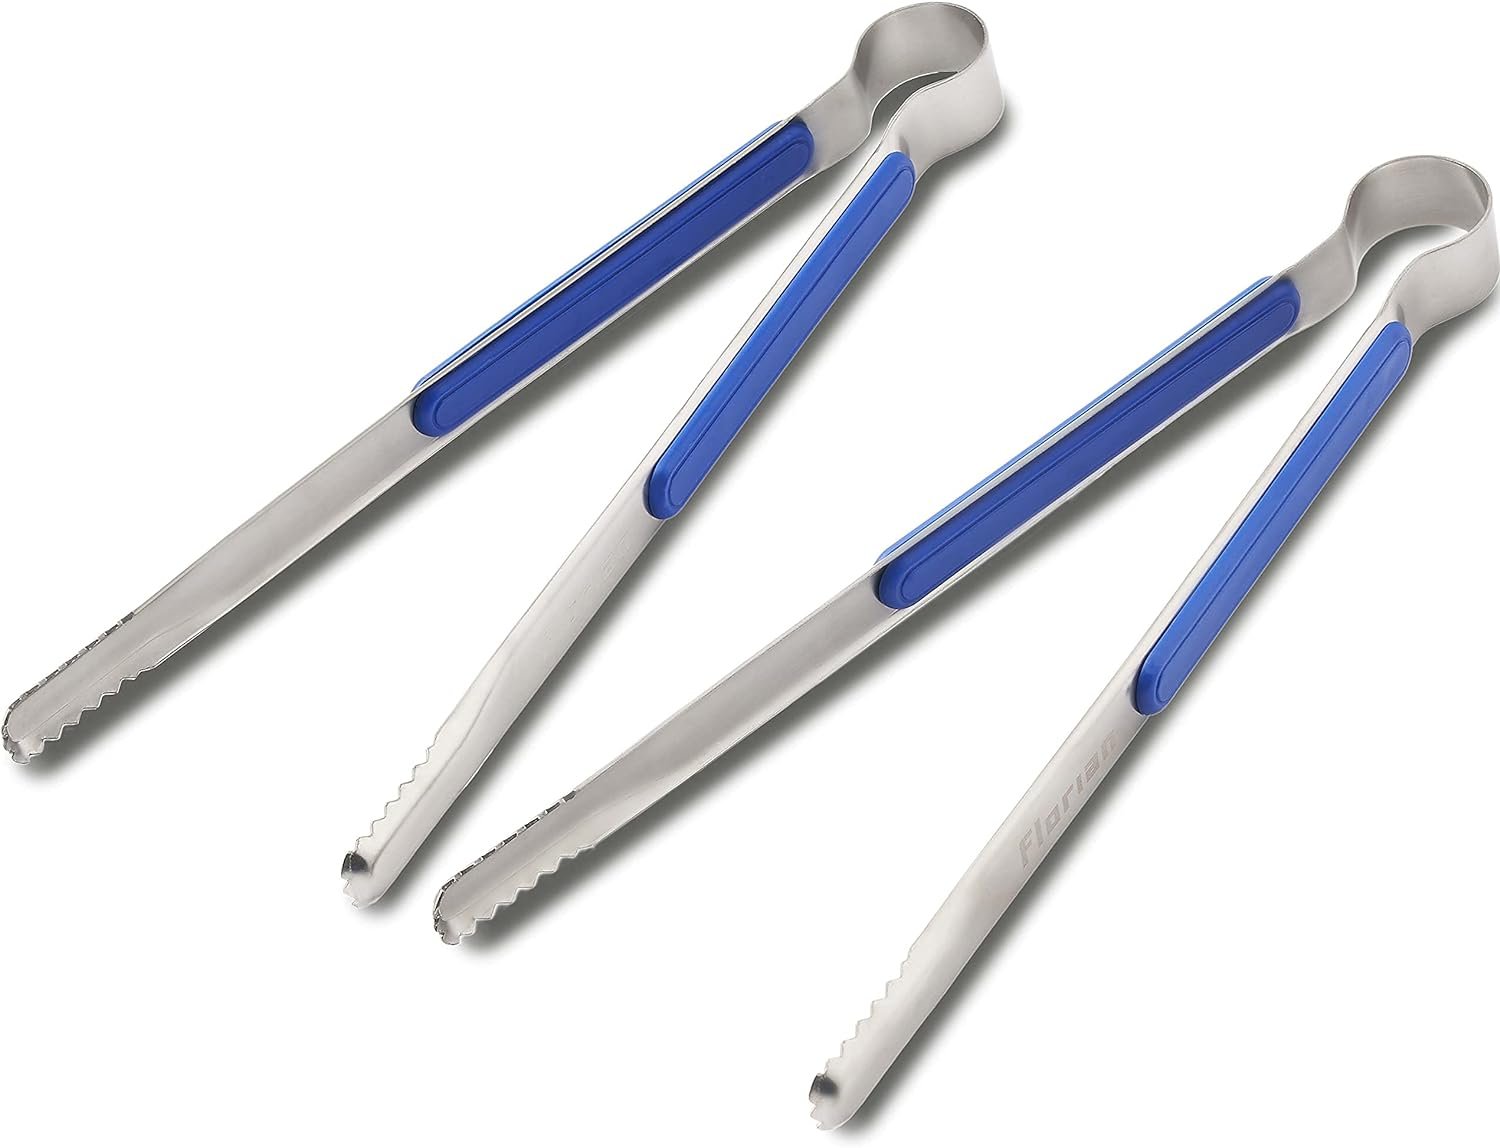 (Florian) Multi Proposal 10.04 Inch Tongs High strength stainless steel, Bounds Spring, Smooth Edge For food, BBQ, Bulgogi, Cooking, Outdoor, Korean Kitchen Gadget Tools, Utensils (Blue Large 2 Pcs)